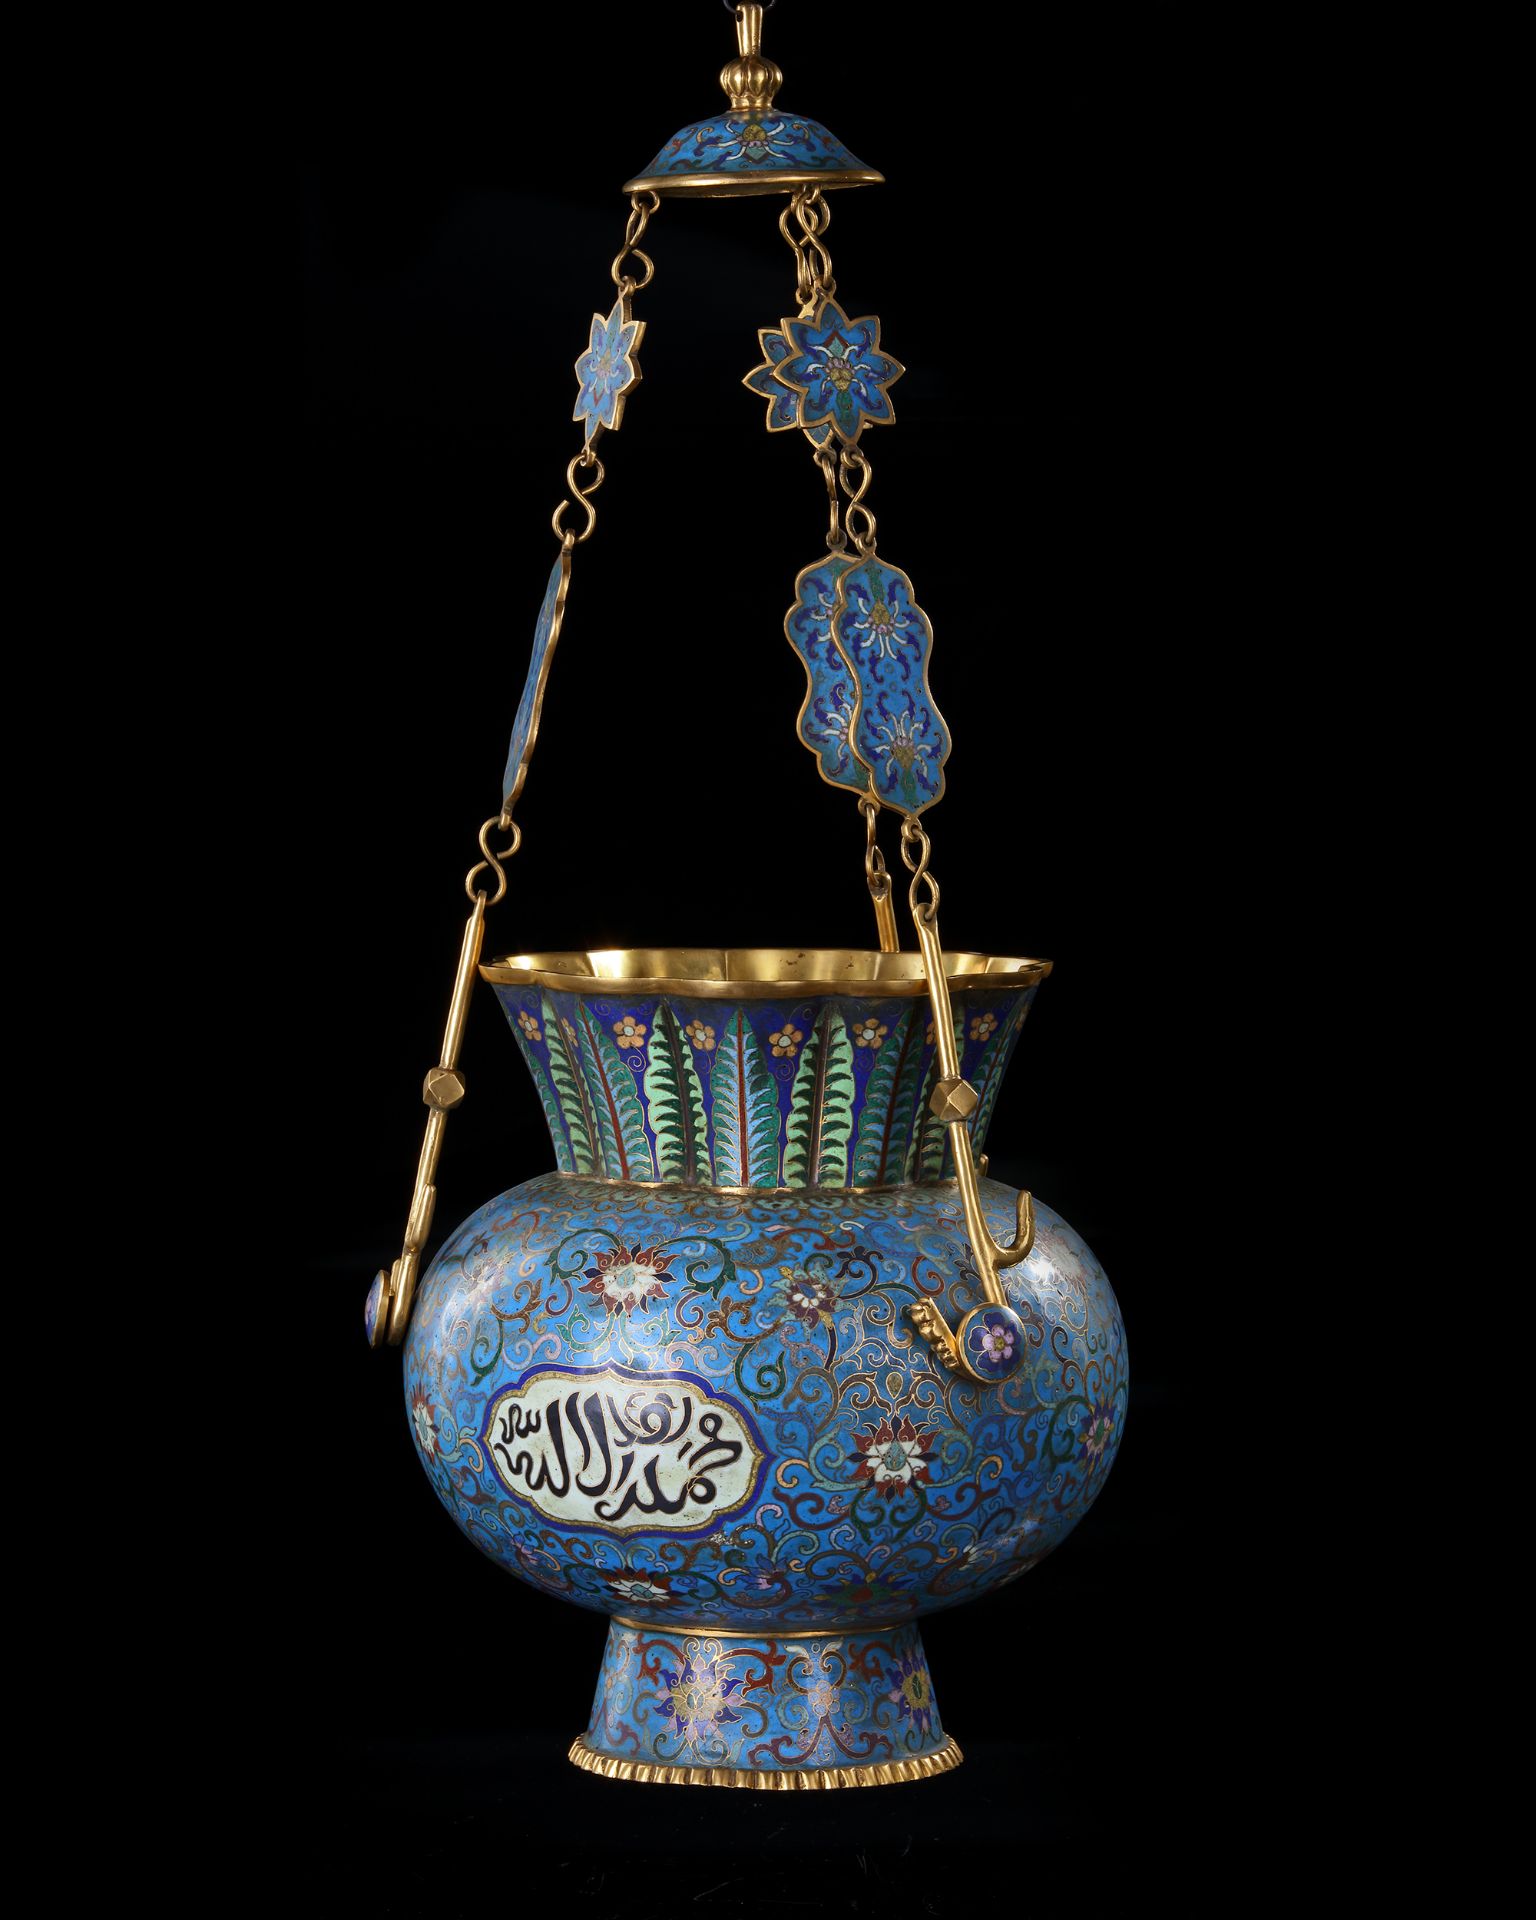 A CHINESE CLOISONNÉ MOSQUE LAMP FOR THE ISLAMIC MARKET, LATE 19TH CENTURY - Image 2 of 10